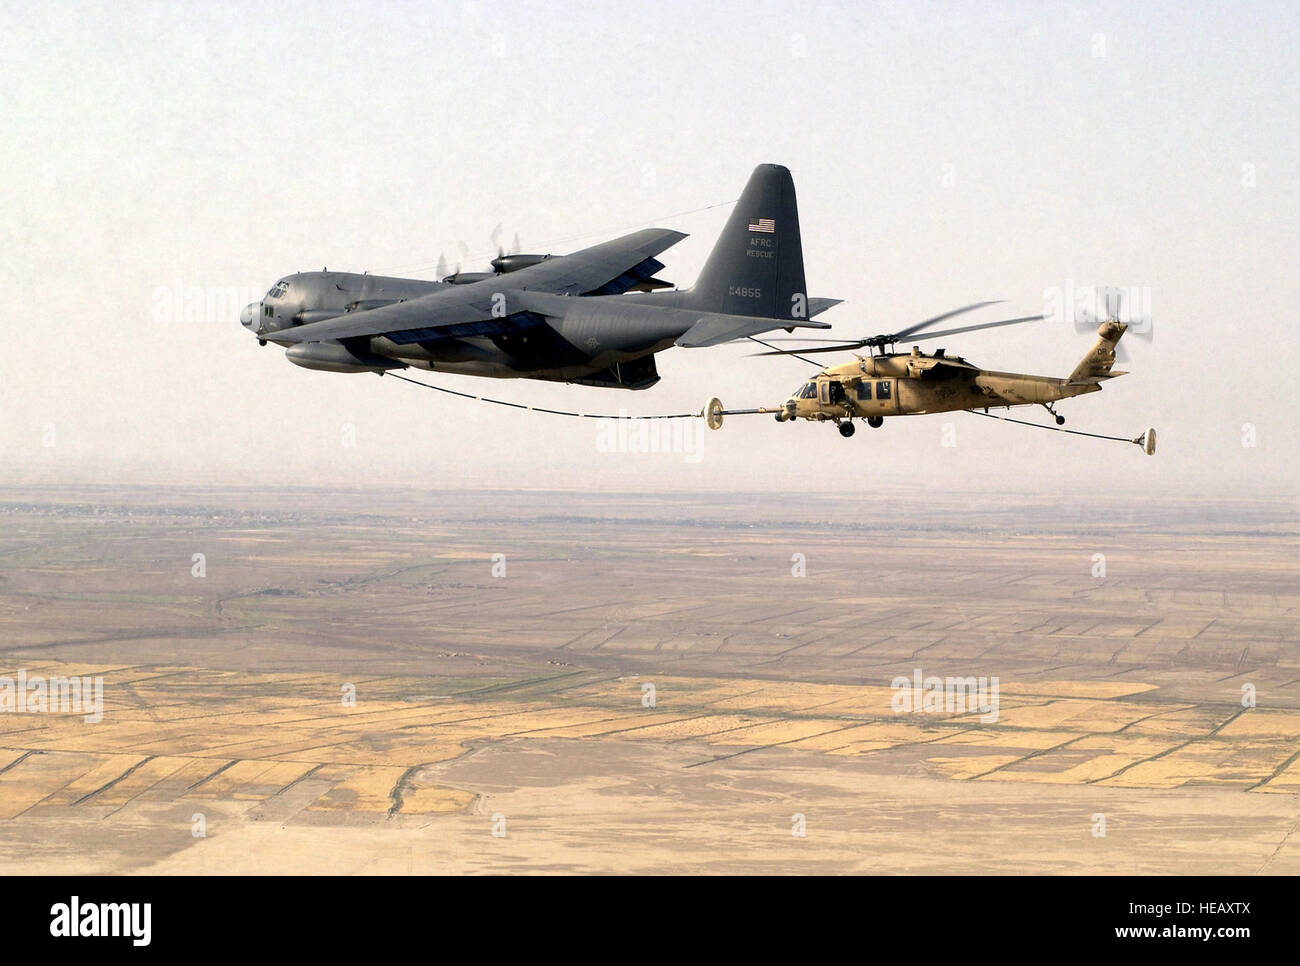 A US Air Force Reserve HH-60G Pave Hawk search and rescue helicopter assigned to the 301st Rescue Squadron, conducts in flight refueling with a Air Force Reserve Command HC-130 Hercules tanker aircraft from the 39th Rescue Squadron, during a mission over Tallil Air Base, Iraq, during Operation Iraqi Freedom Staff Sgt. Shane Cuomo) Stock Photo